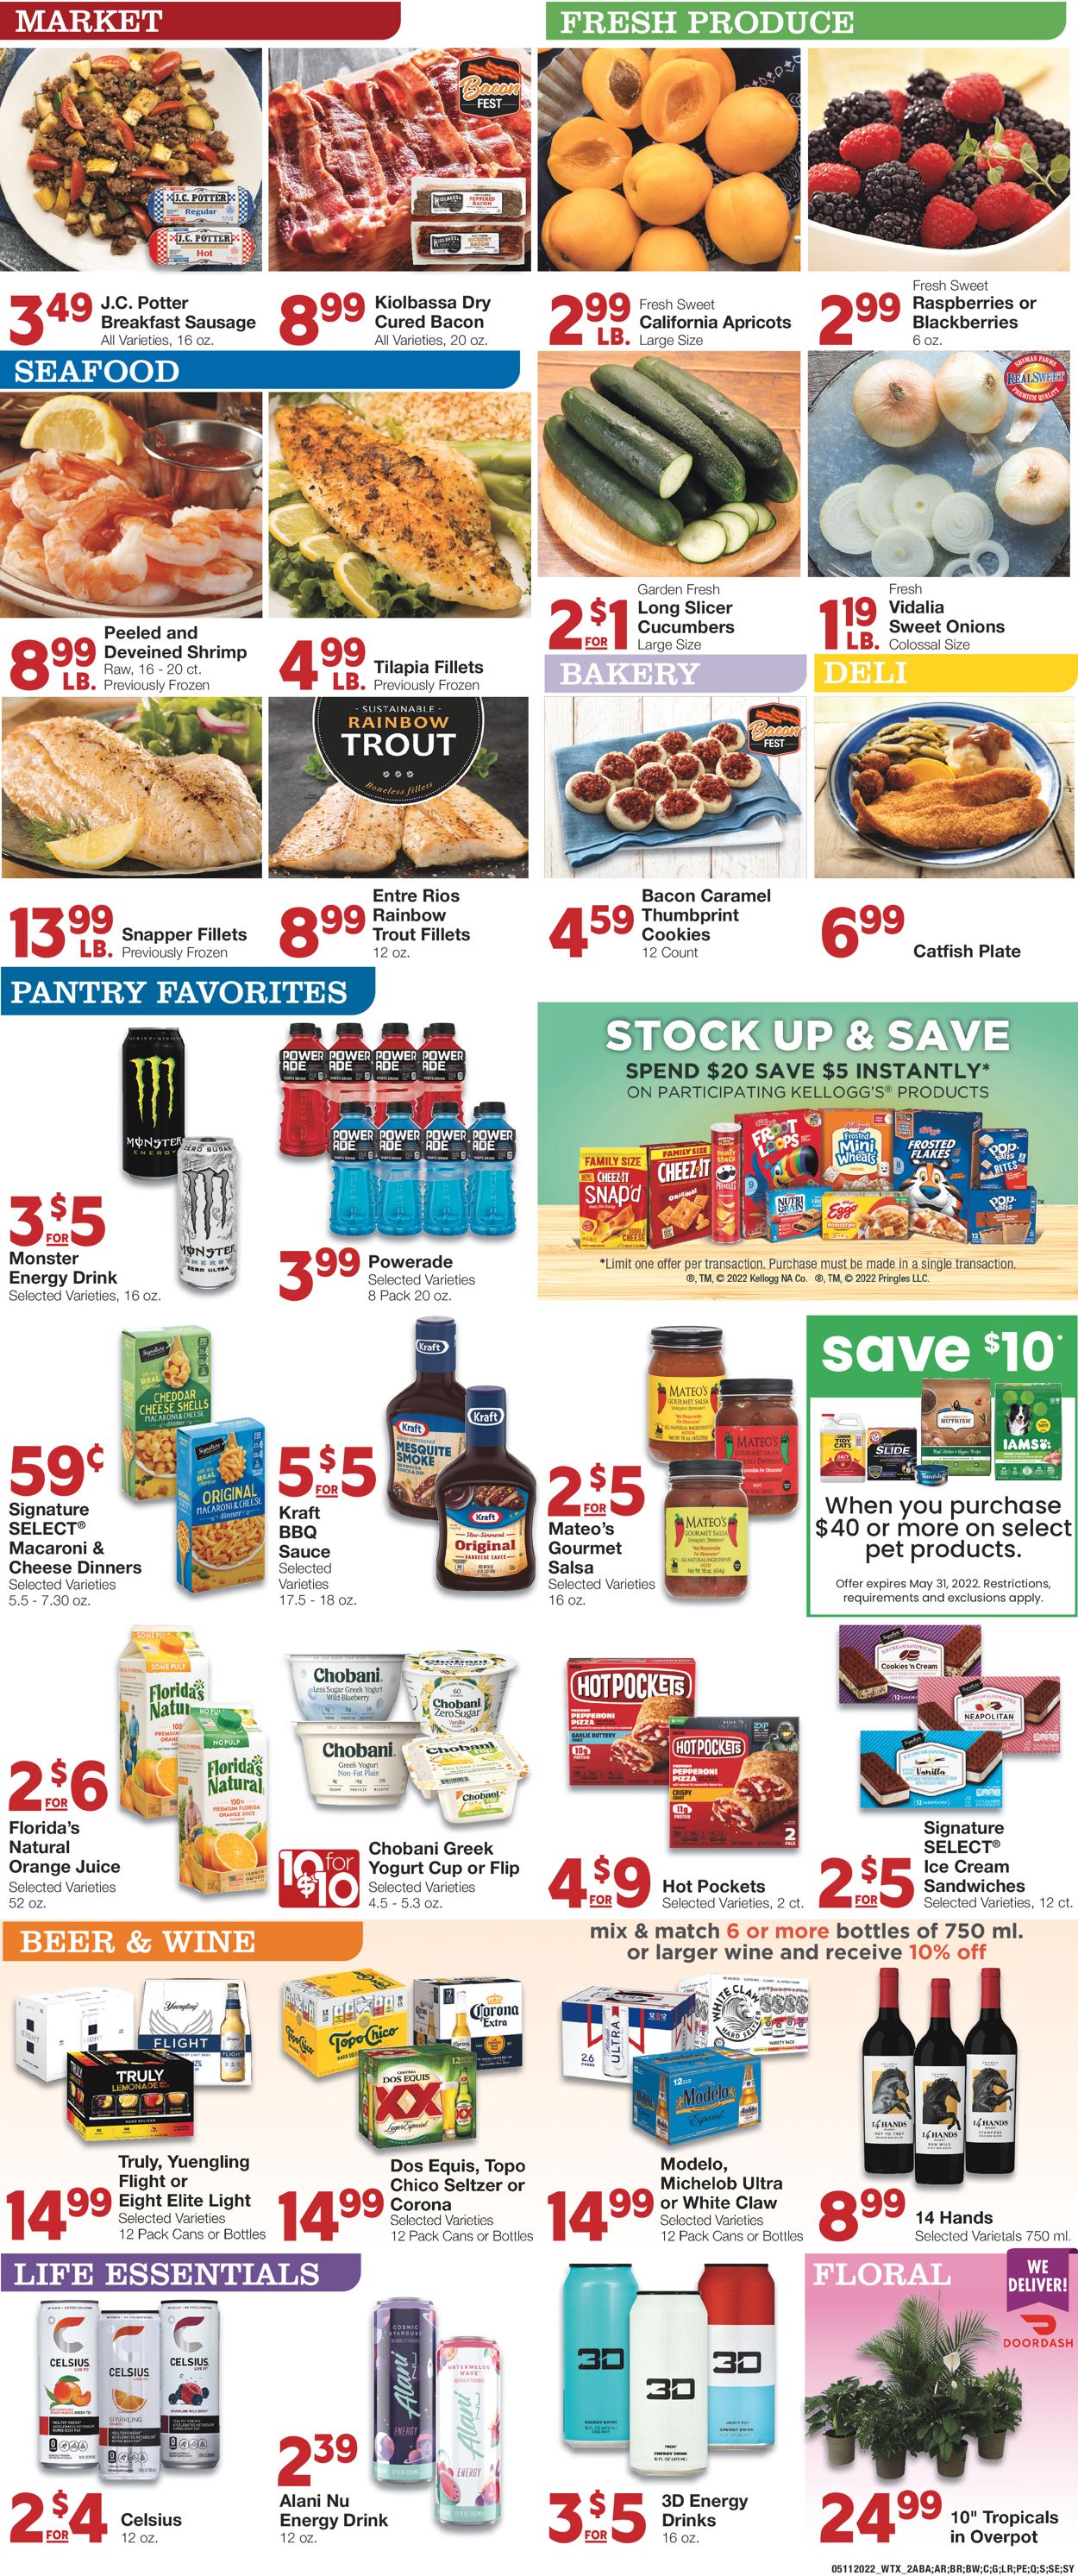 United Supermarkets Current weekly ad 05/11 - 05/17/2022 [2] - frequent ...